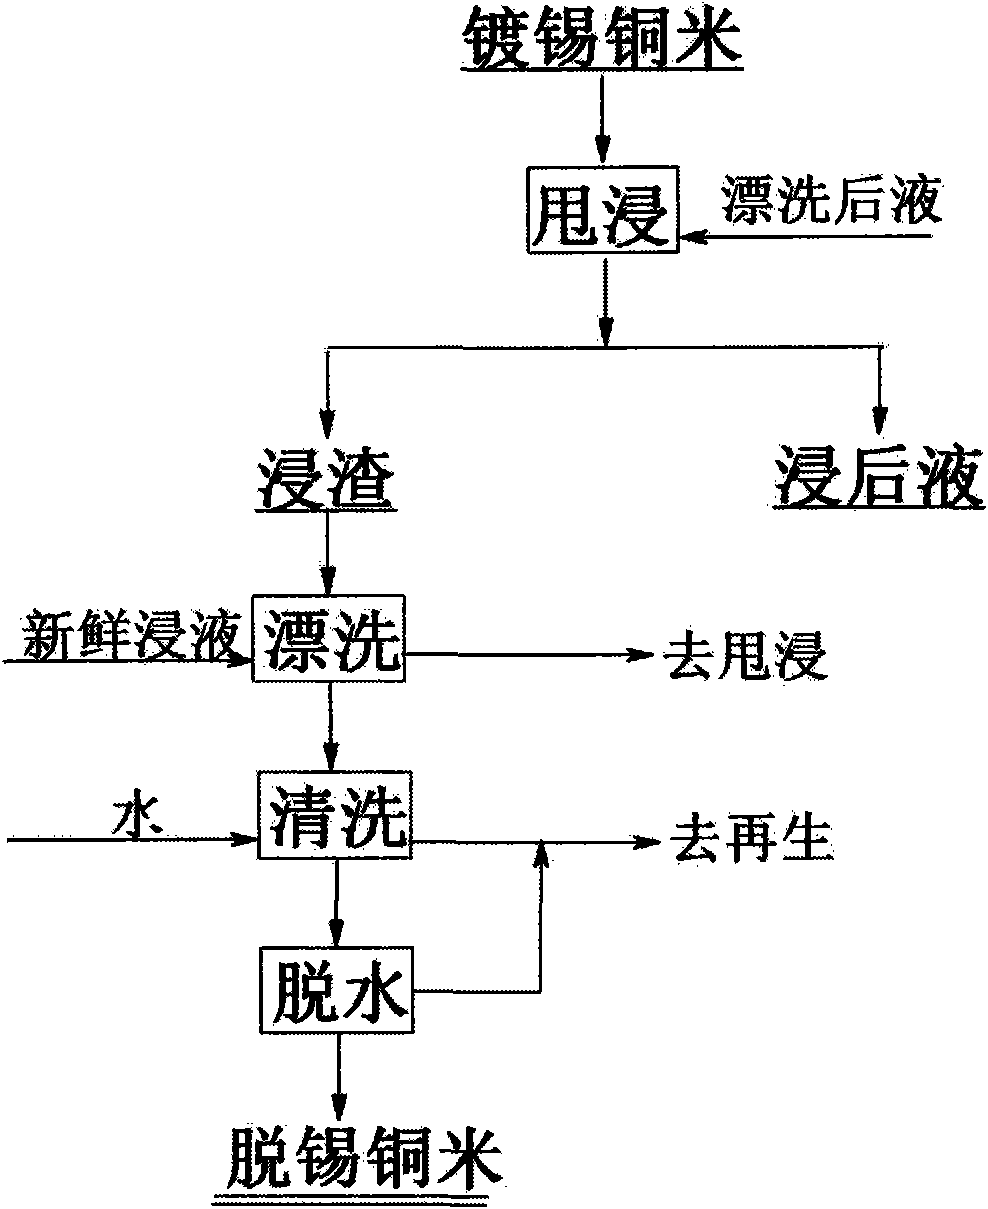 Method and device for separating and recovering metallic copper and tin in tinplating copper rice